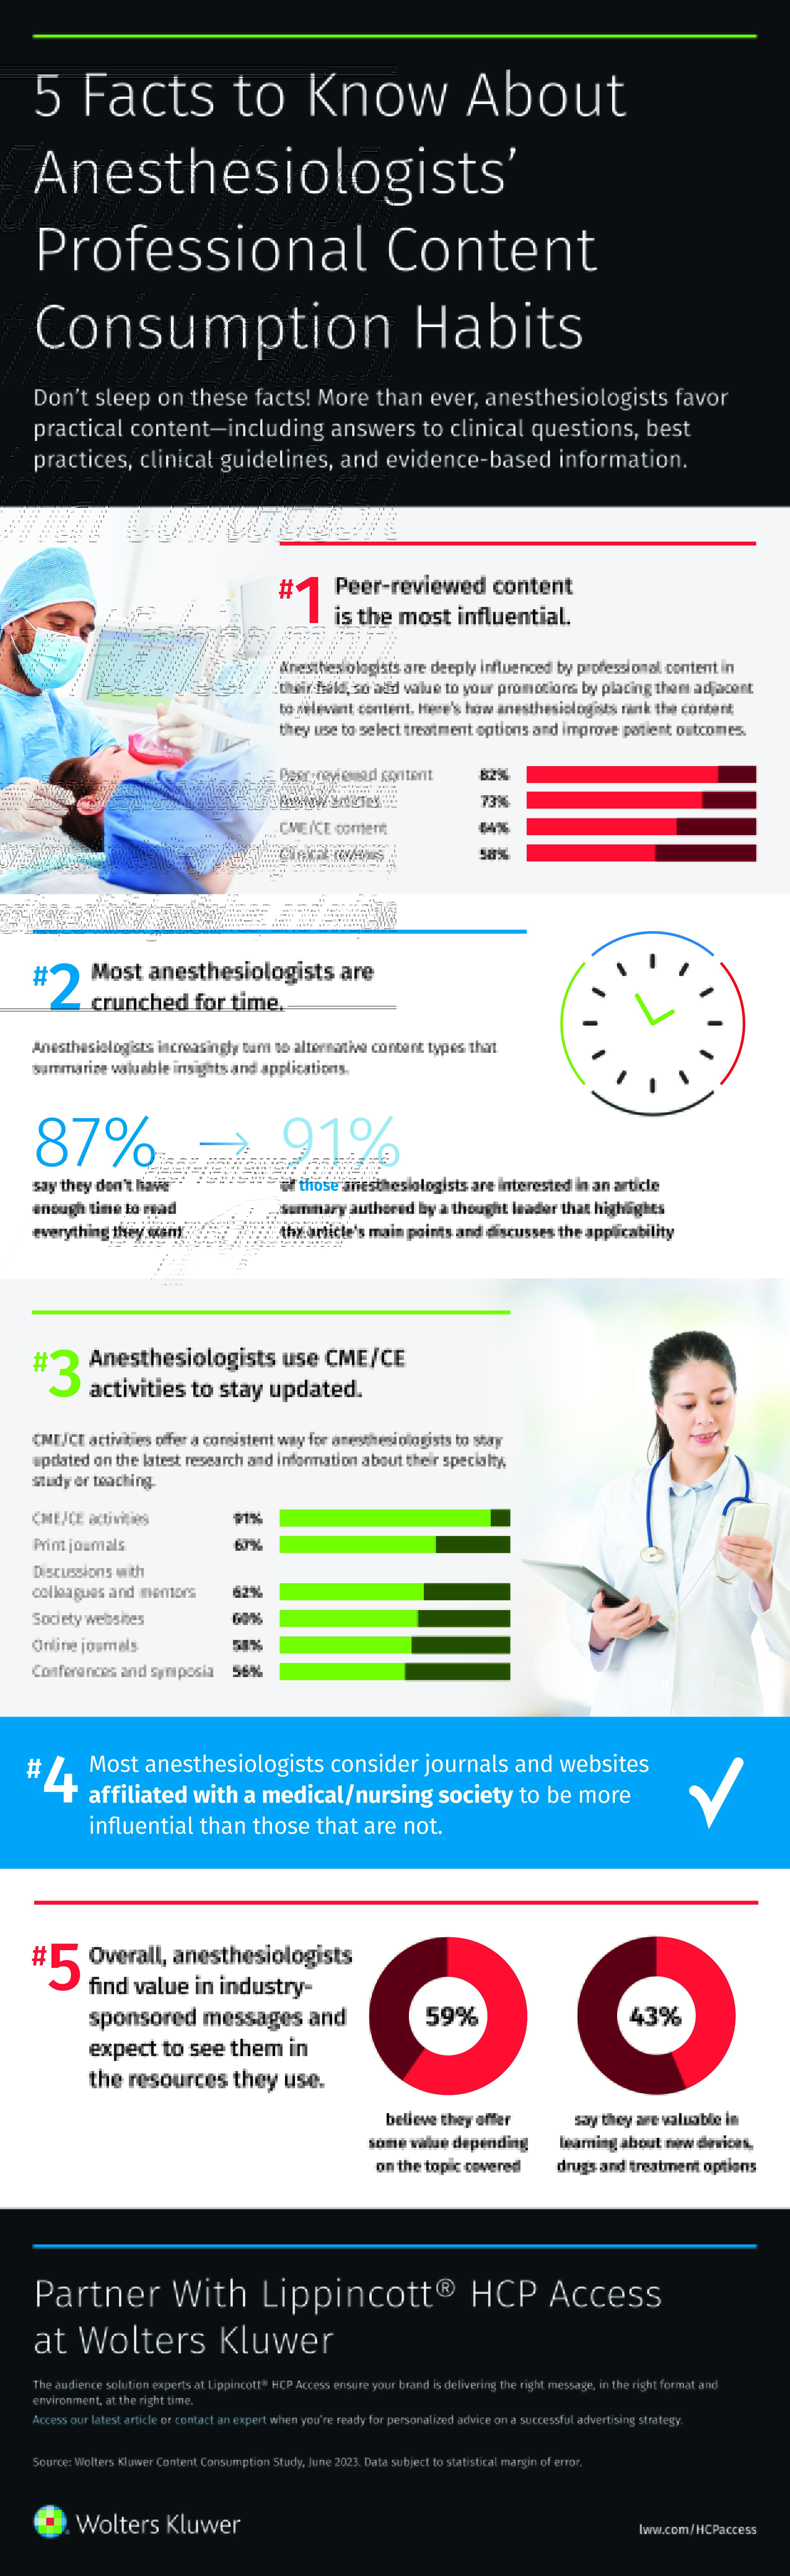 anesthesiologists content consumption habits infographic